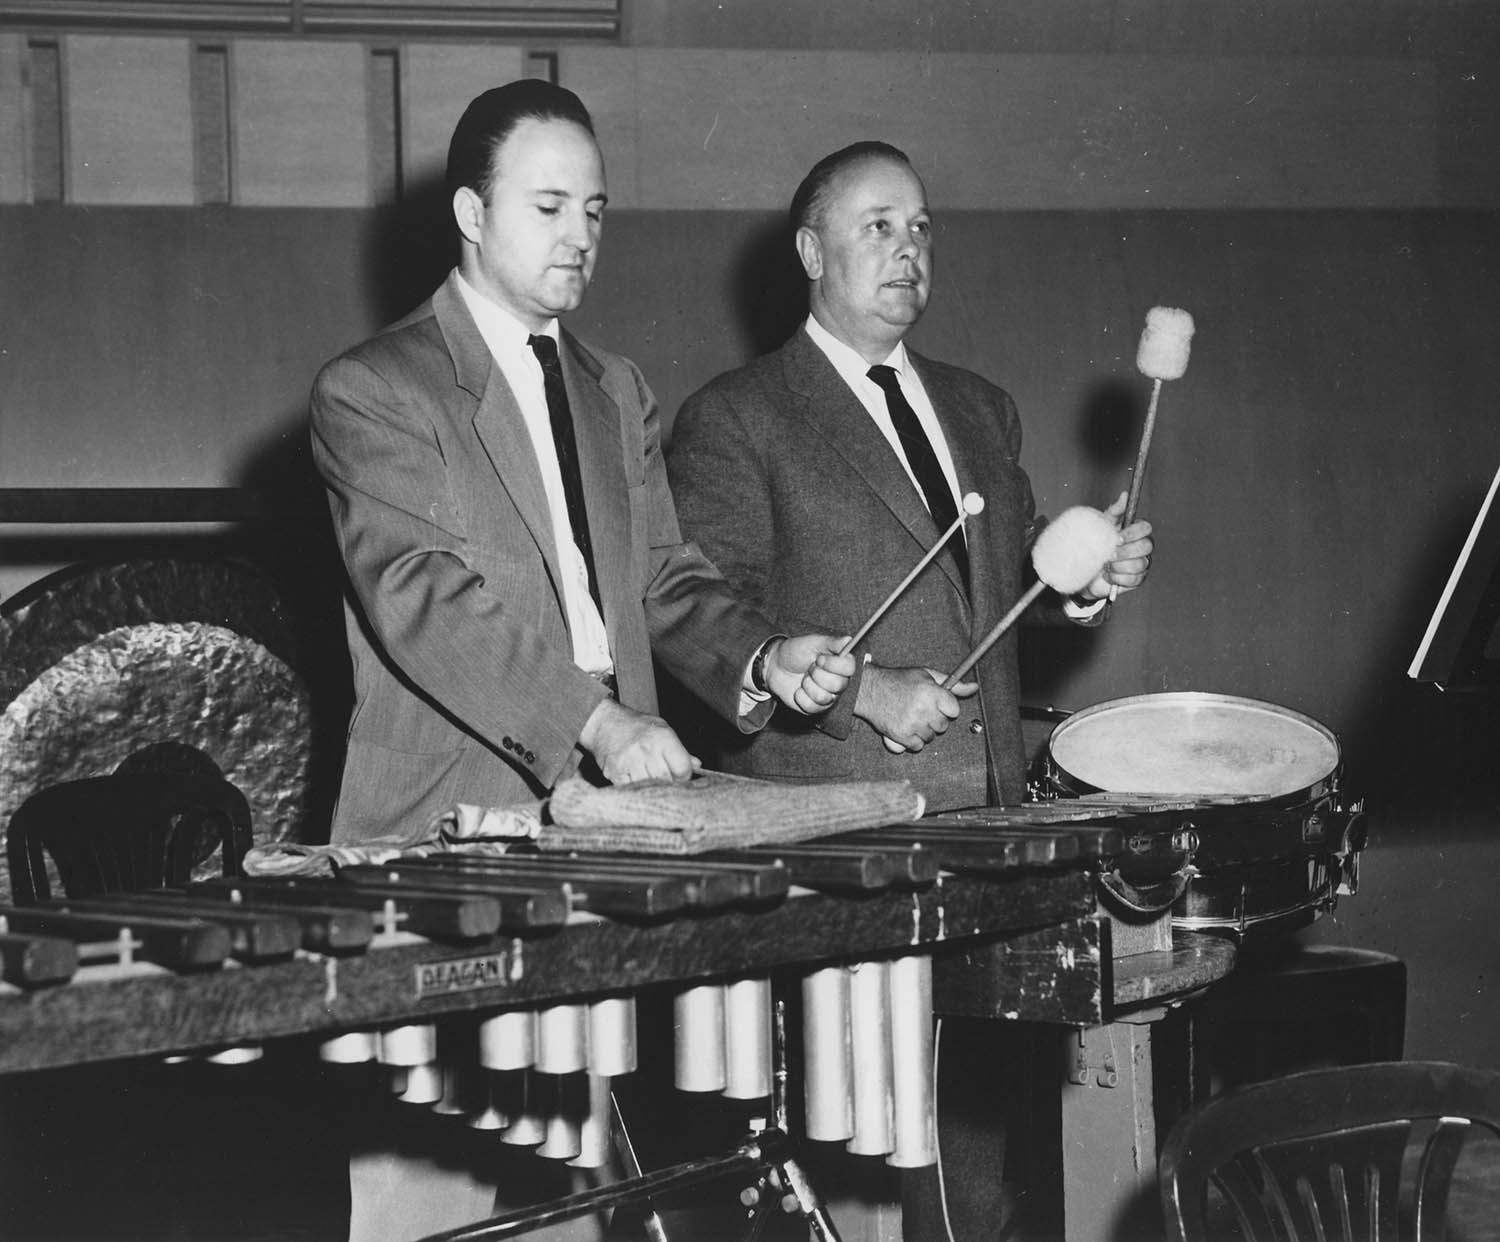 Program annotator Klaus George Roy (Left) and acoustical consultant Heinrich Keilholz (Right) conduct tests on reverberation times with percussion instruments on the renovated Severance Hall stage. Unknown photographer, 1958. 